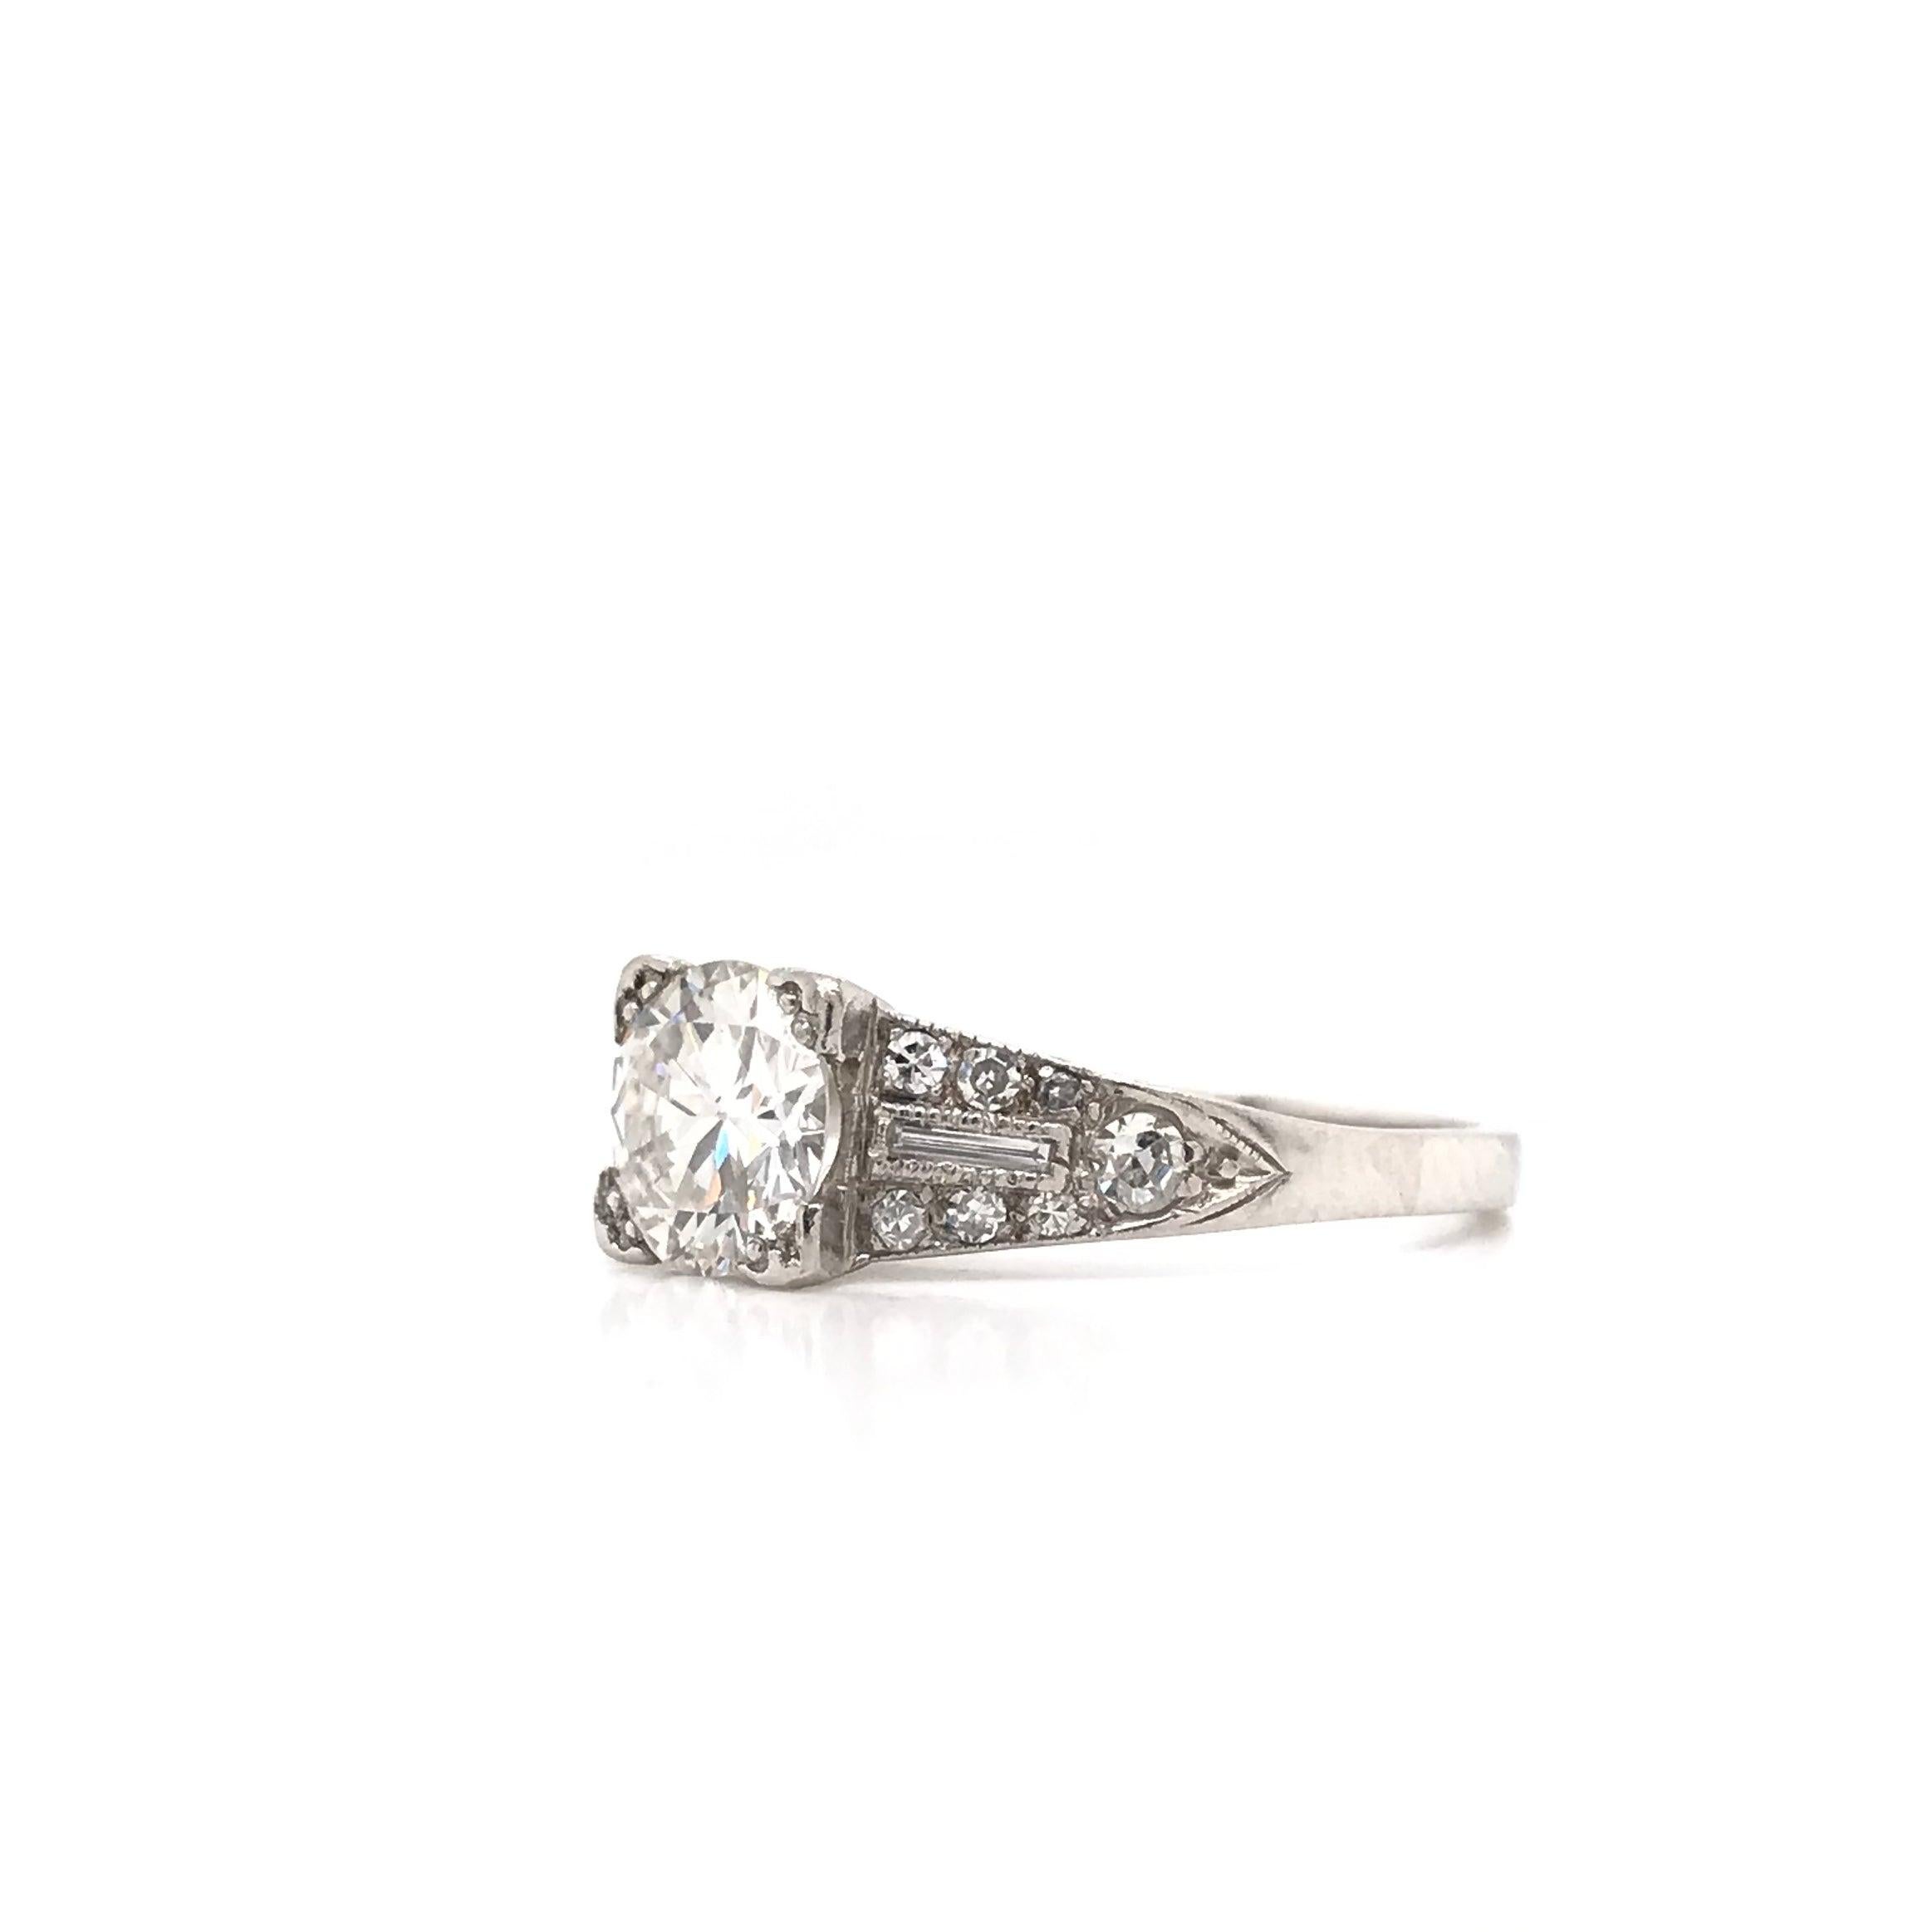 This stunning antique piece was handcrafted sometime during the Art Deco design period ( 1920-1940 ). The platinum setting features a beautiful center diamond measuring approximately 0.94 carats. The center diamond grades approximately H in color,